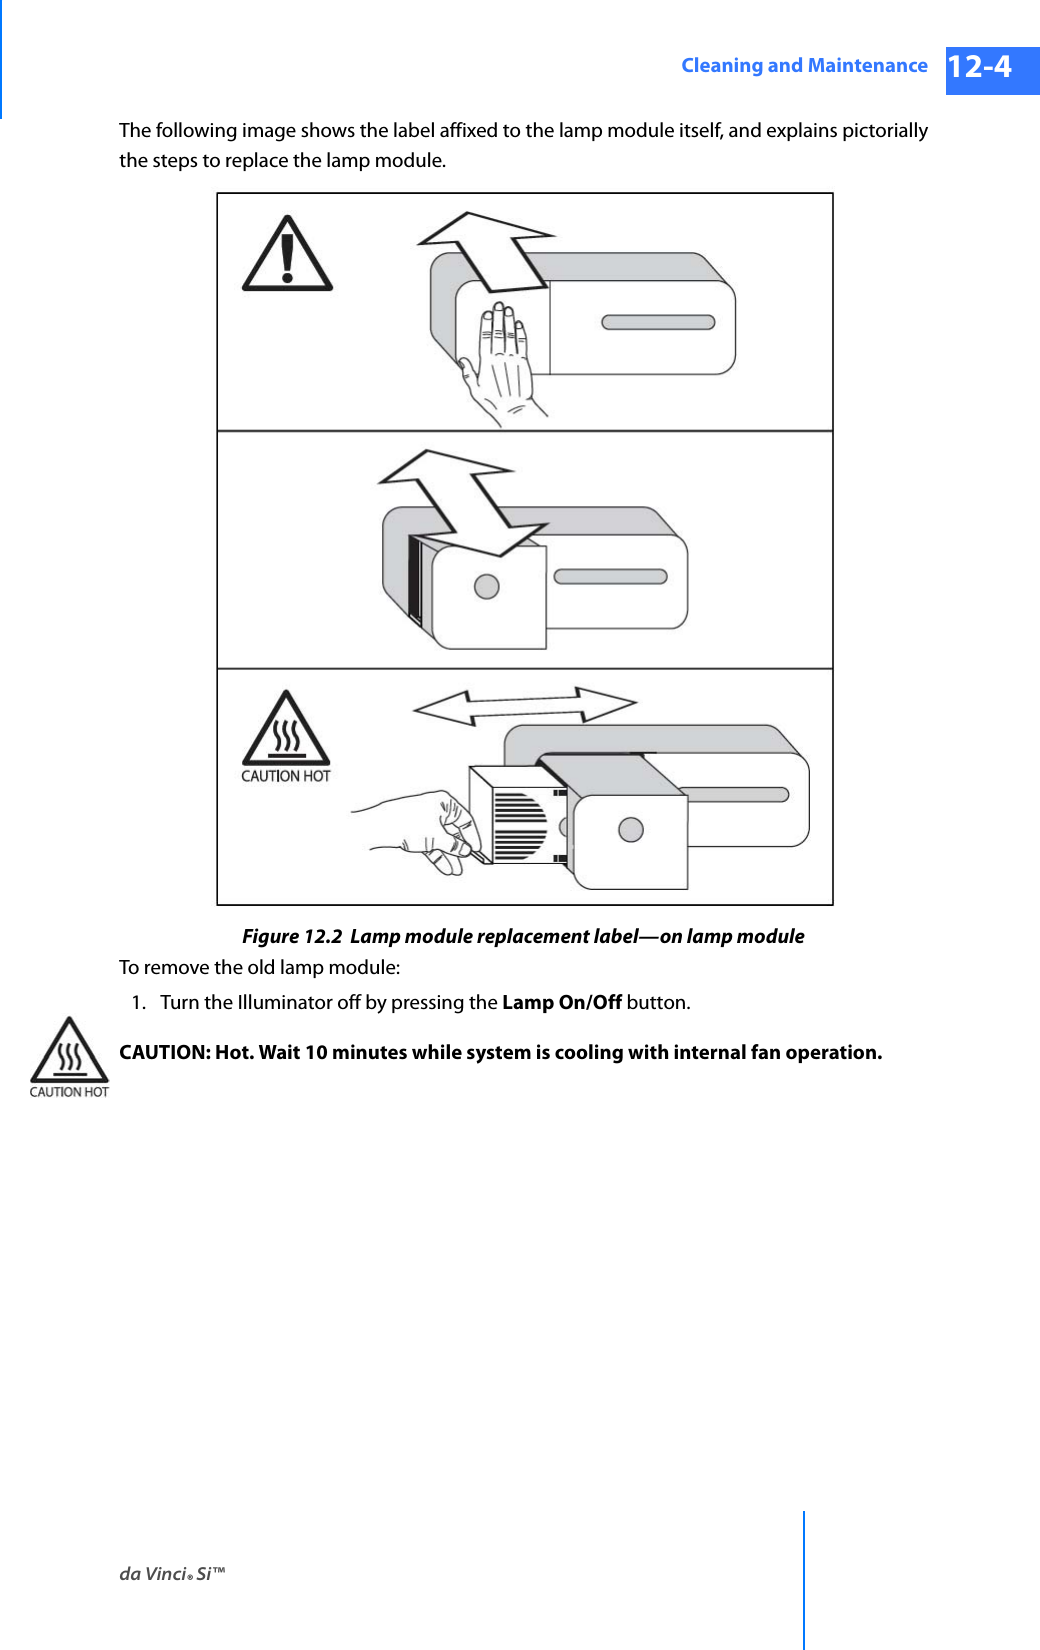 da Vinci® Si™Cleaning and Maintenance 12-4DRAFT/PRE-RELEASE/CONFIDENTIAL 10/9/14The following image shows the label affixed to the lamp module itself, and explains pictorially the steps to replace the lamp module. Figure 12.2  Lamp module replacement label—on lamp moduleTo remove the old lamp module:1. Turn the Illuminator off by pressing the Lamp On/Off button.CAUTION: Hot. Wait 10 minutes while system is cooling with internal fan operation.